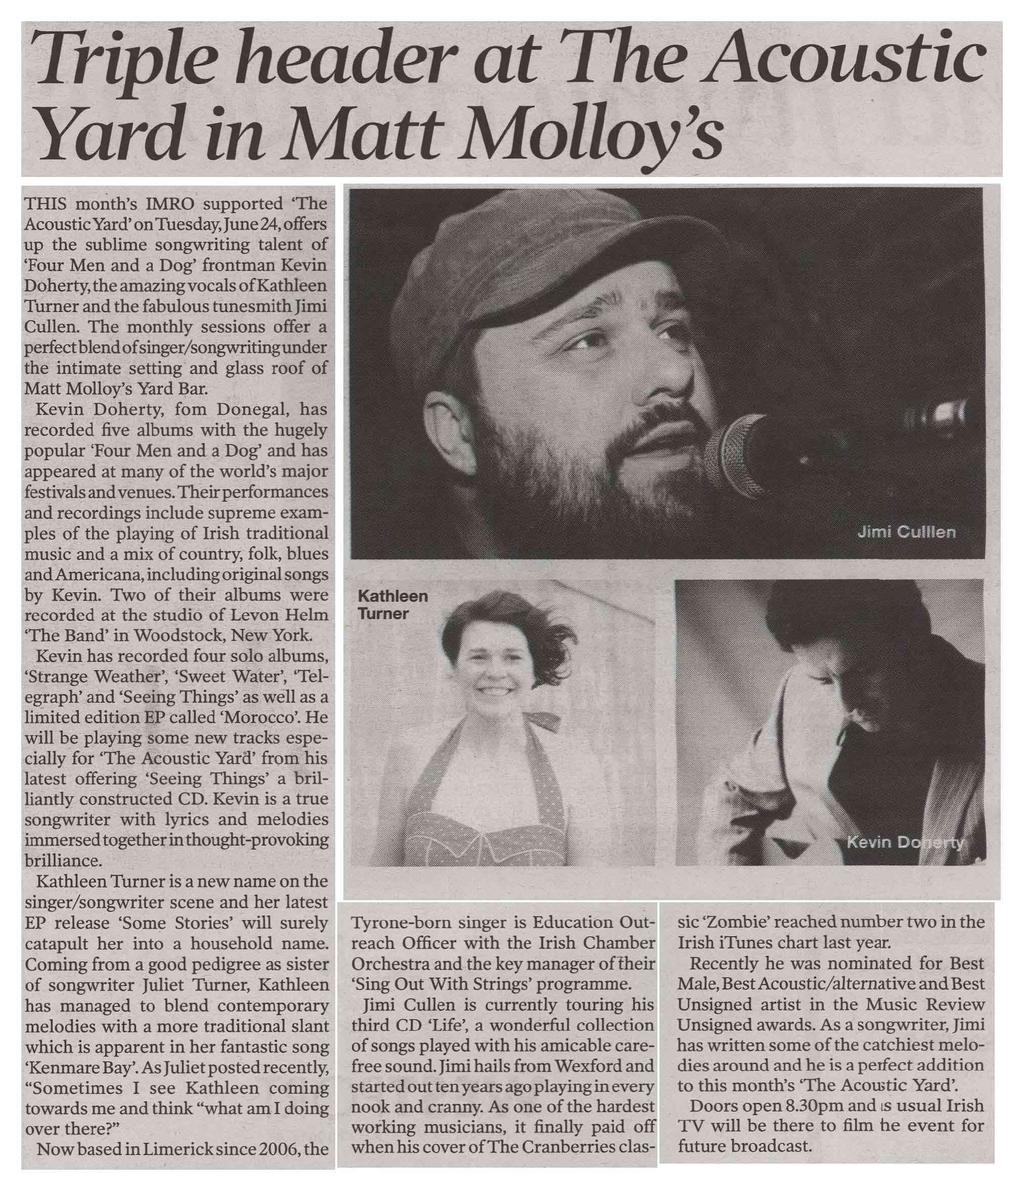 The monthly sessions offer a perfectblendofsinger/songwritingunder the intimate setting and glass roof of Matt Molloy's Yard Bar.